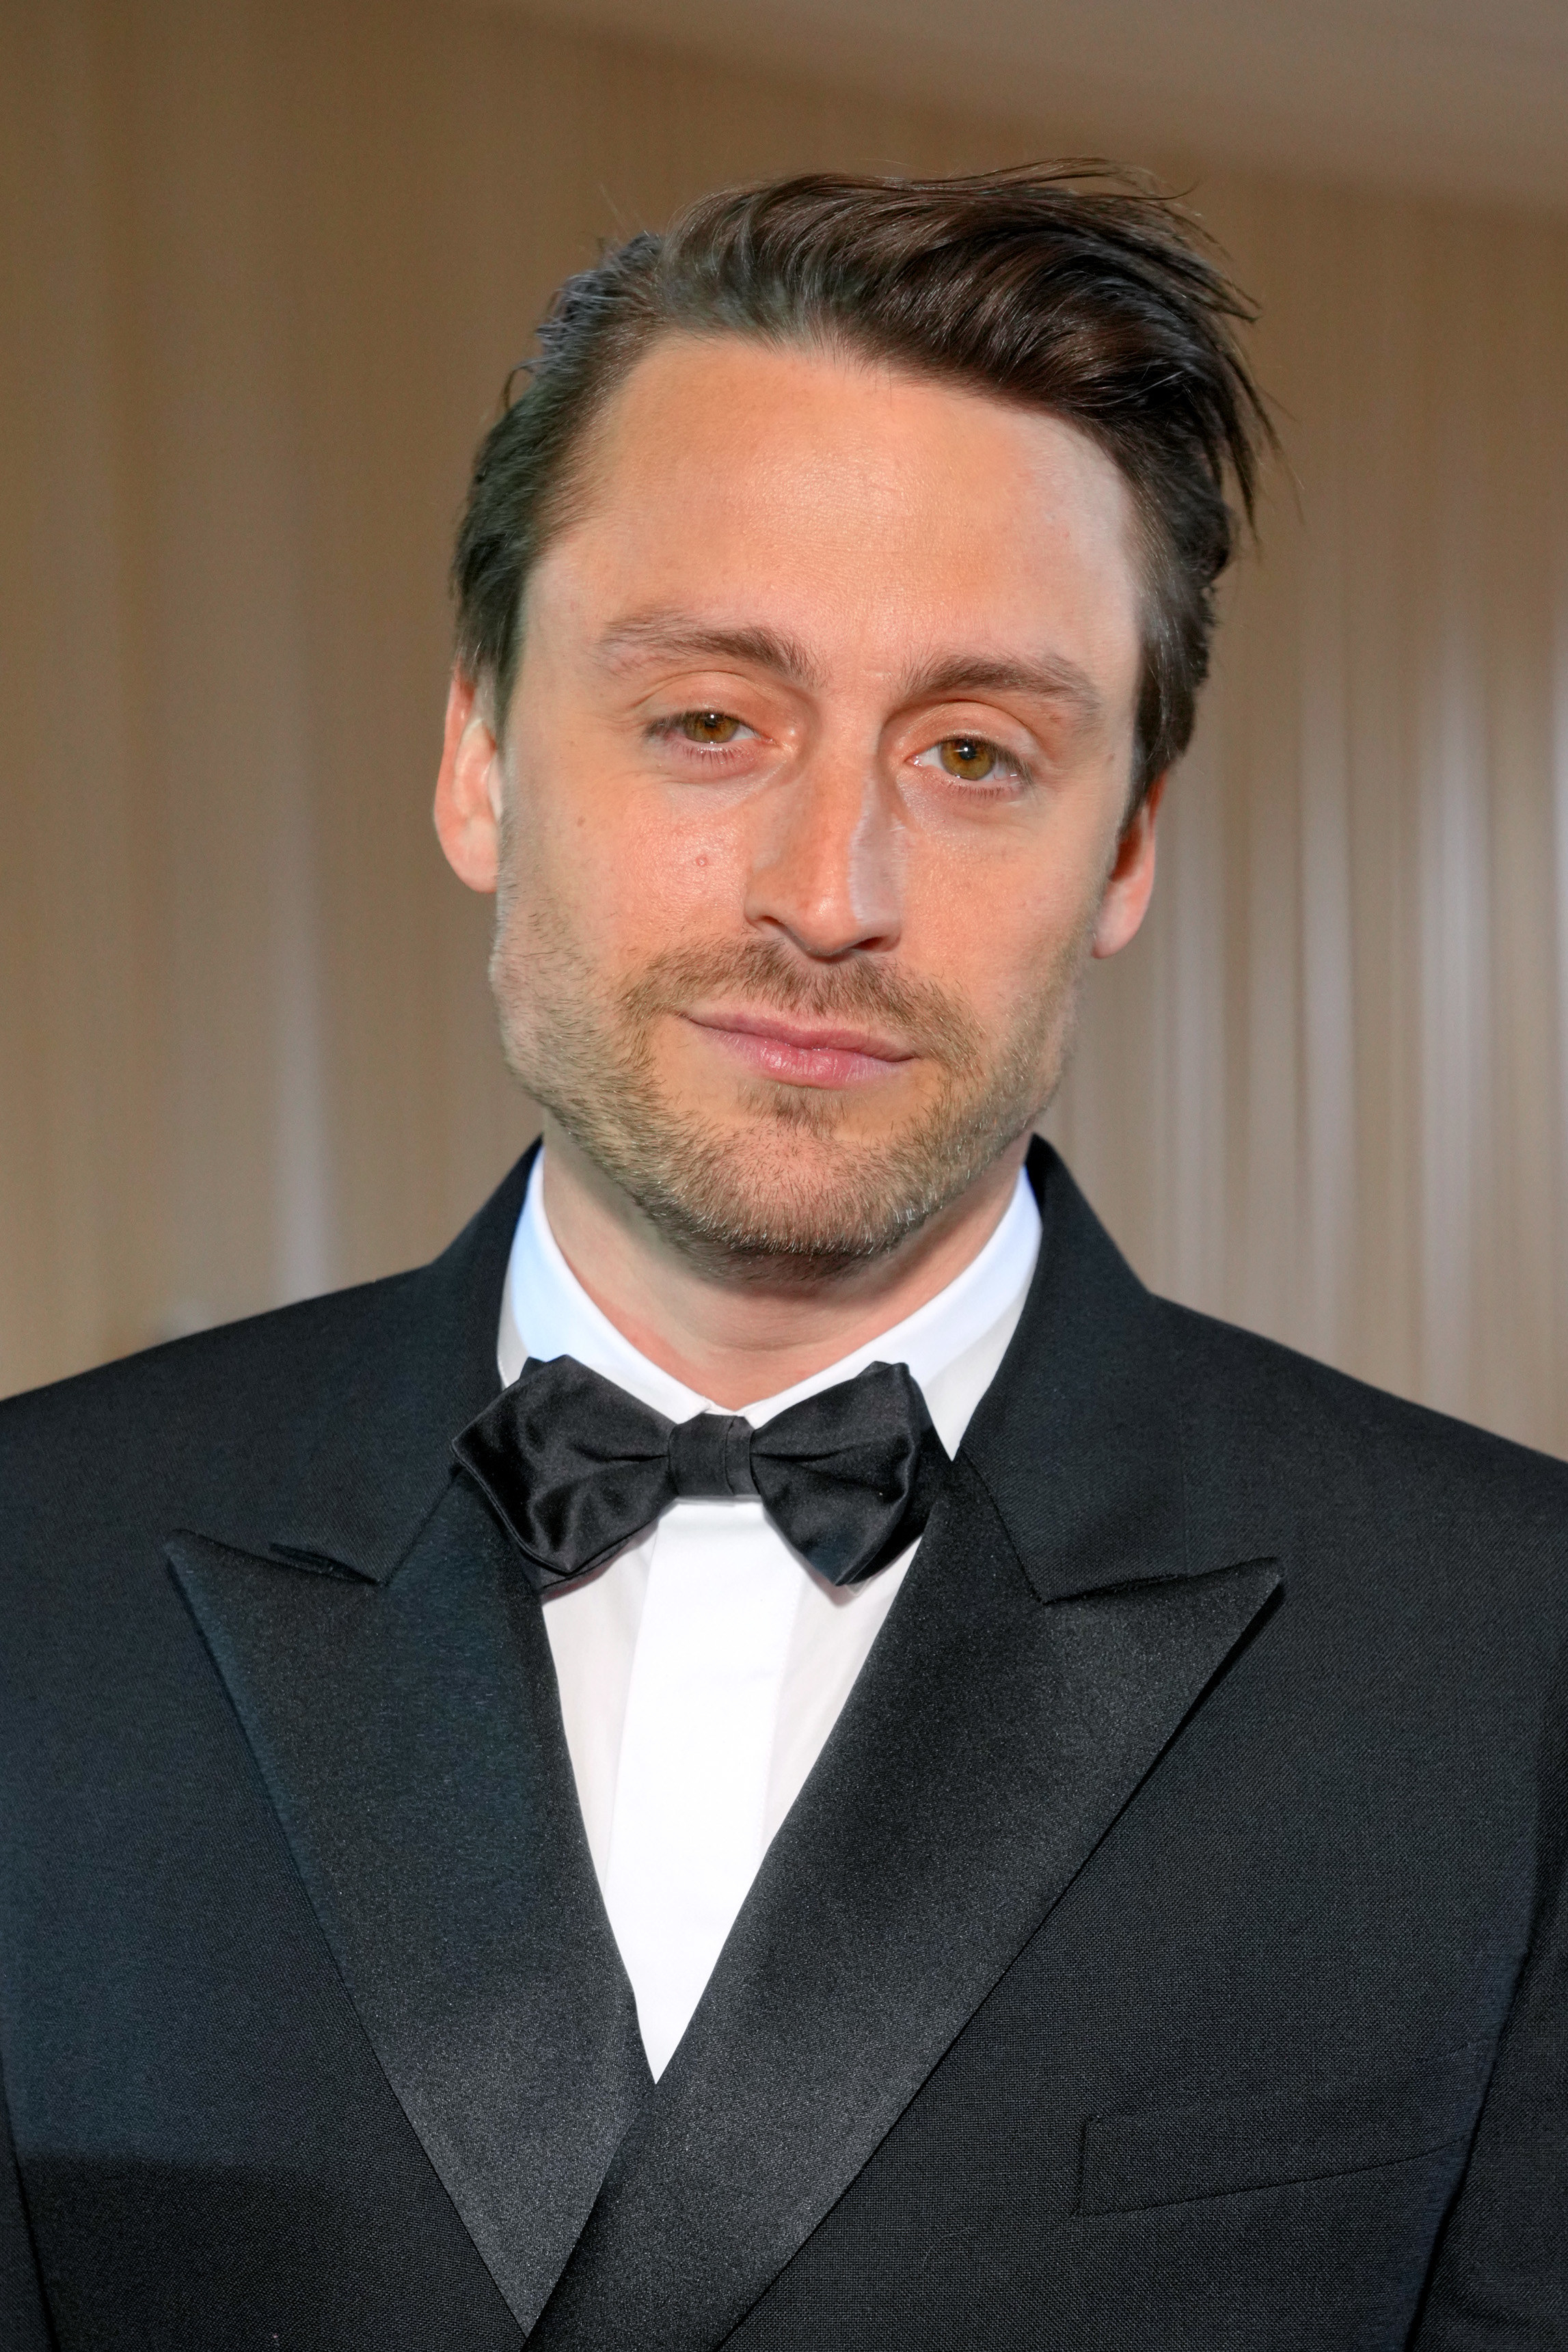 NEW YORK, NEW YORK - MAY 02: (Exclusive Coverage) Kieran Culkin arrives at The 2022 Met Gala Celebrating &quot;In America: An Anthology of Fashion&quot; at The Metropolitan Museum of Art on May 02, 2022 in New York City